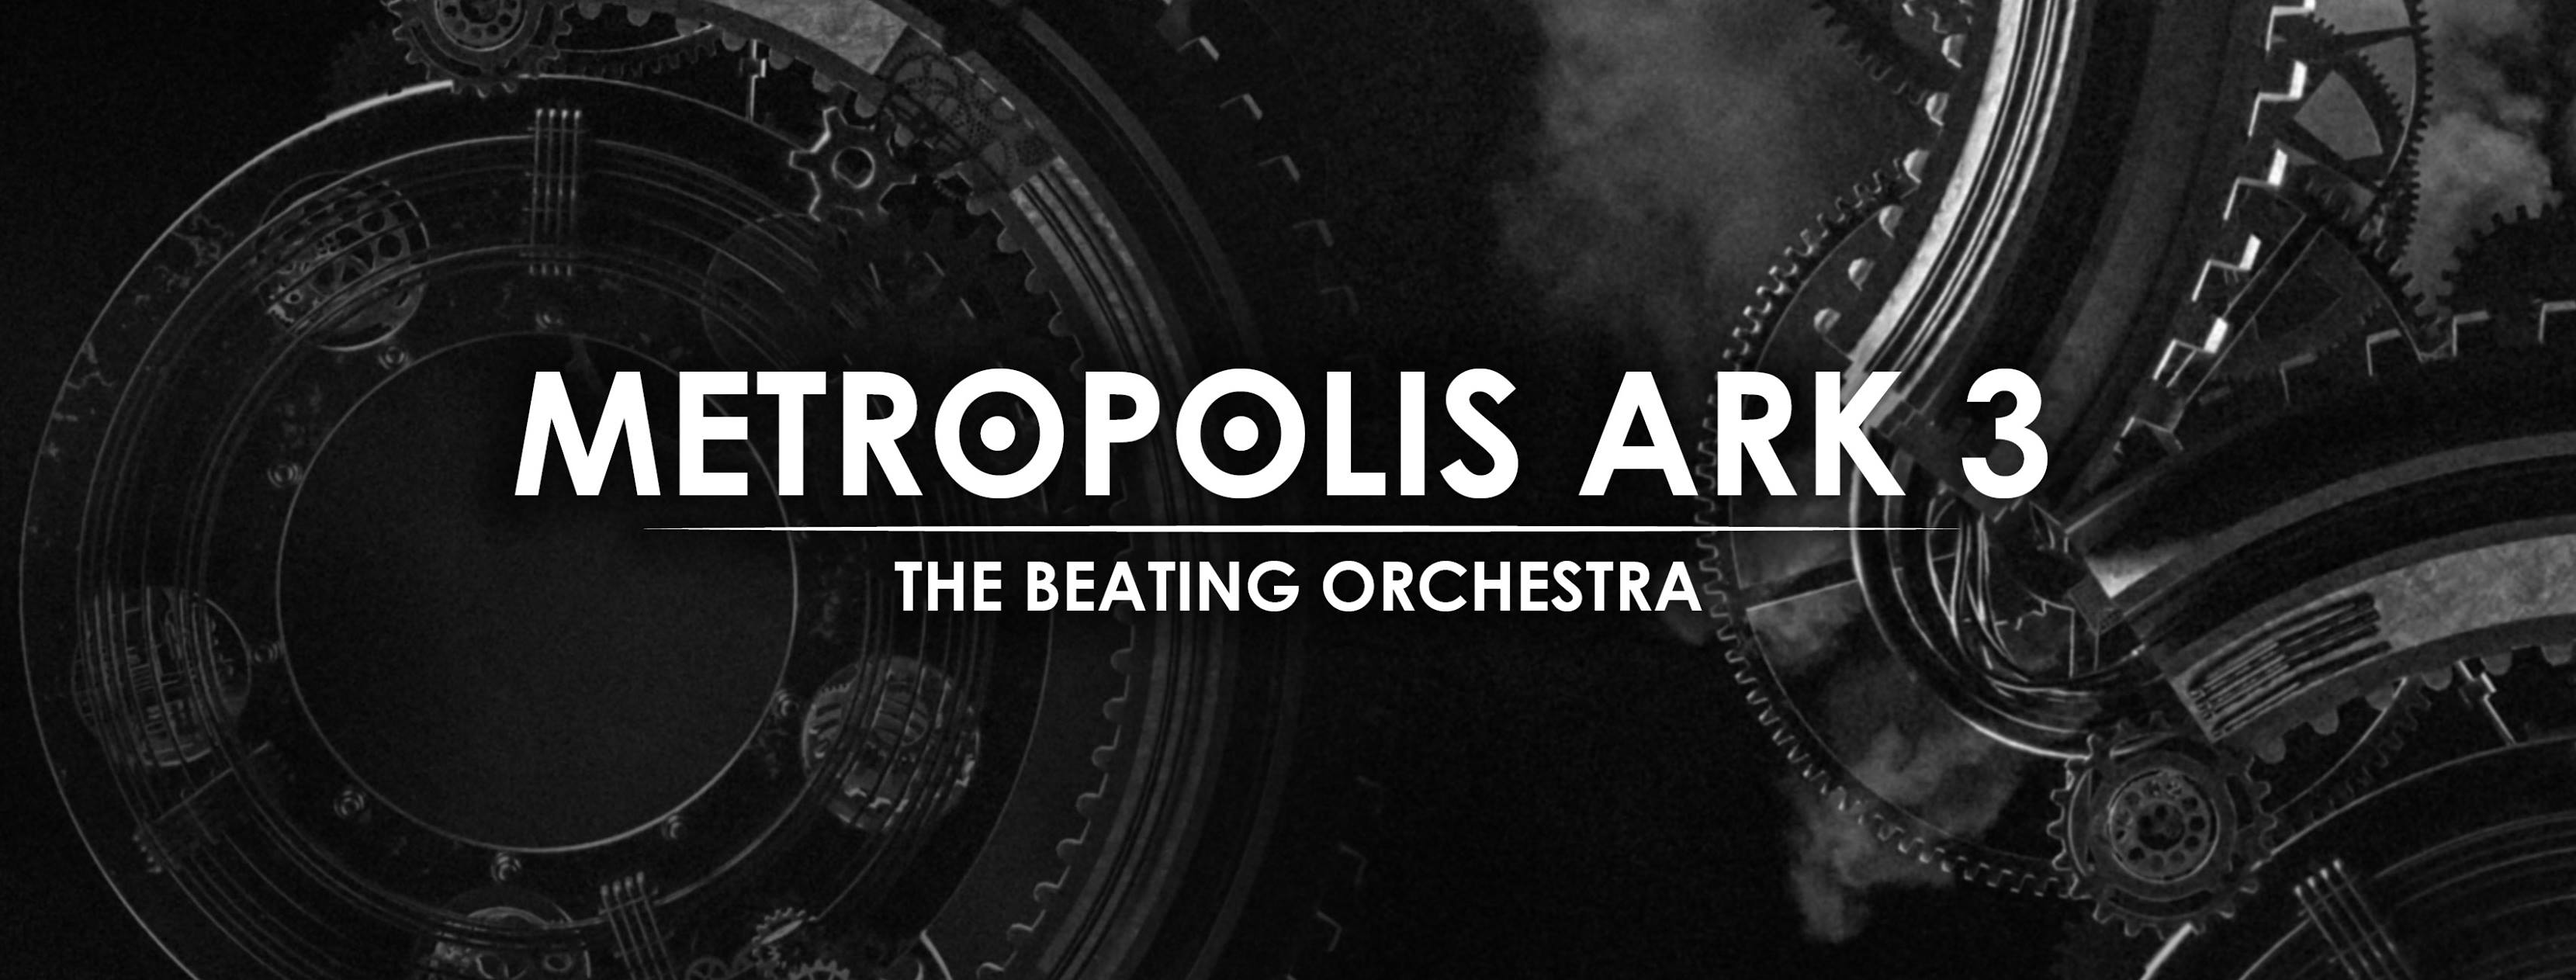 ​METROPOLIS ARK 3 Review – The Beating Orchestra by Orchestral Tools